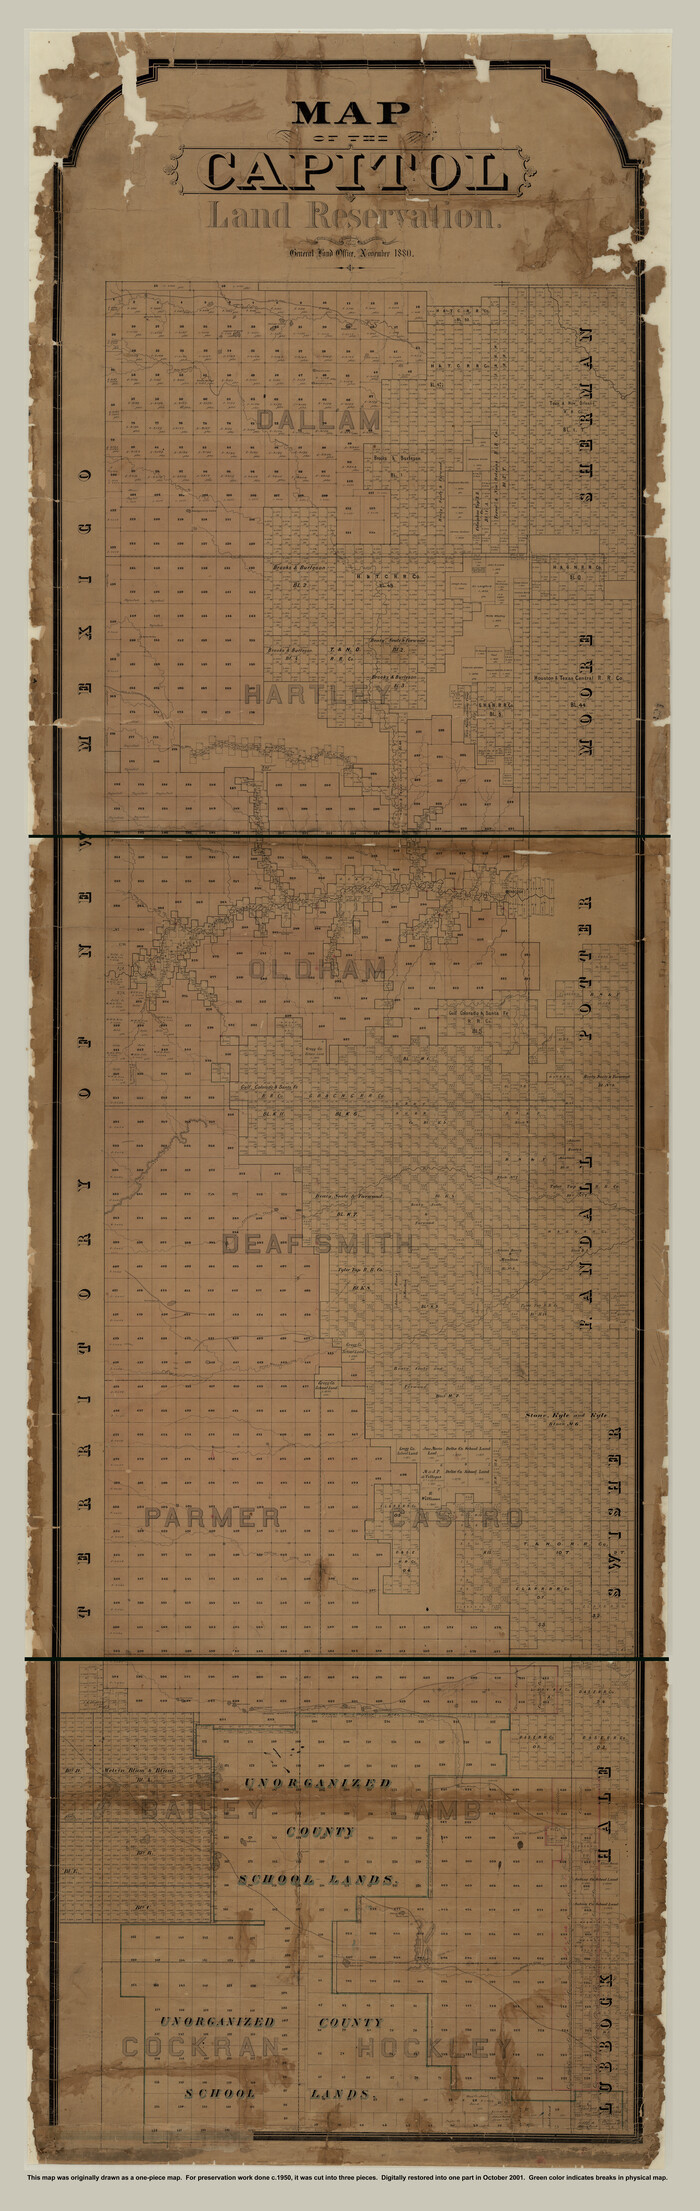 10785, Capitol Land Reservation, General Map Collection